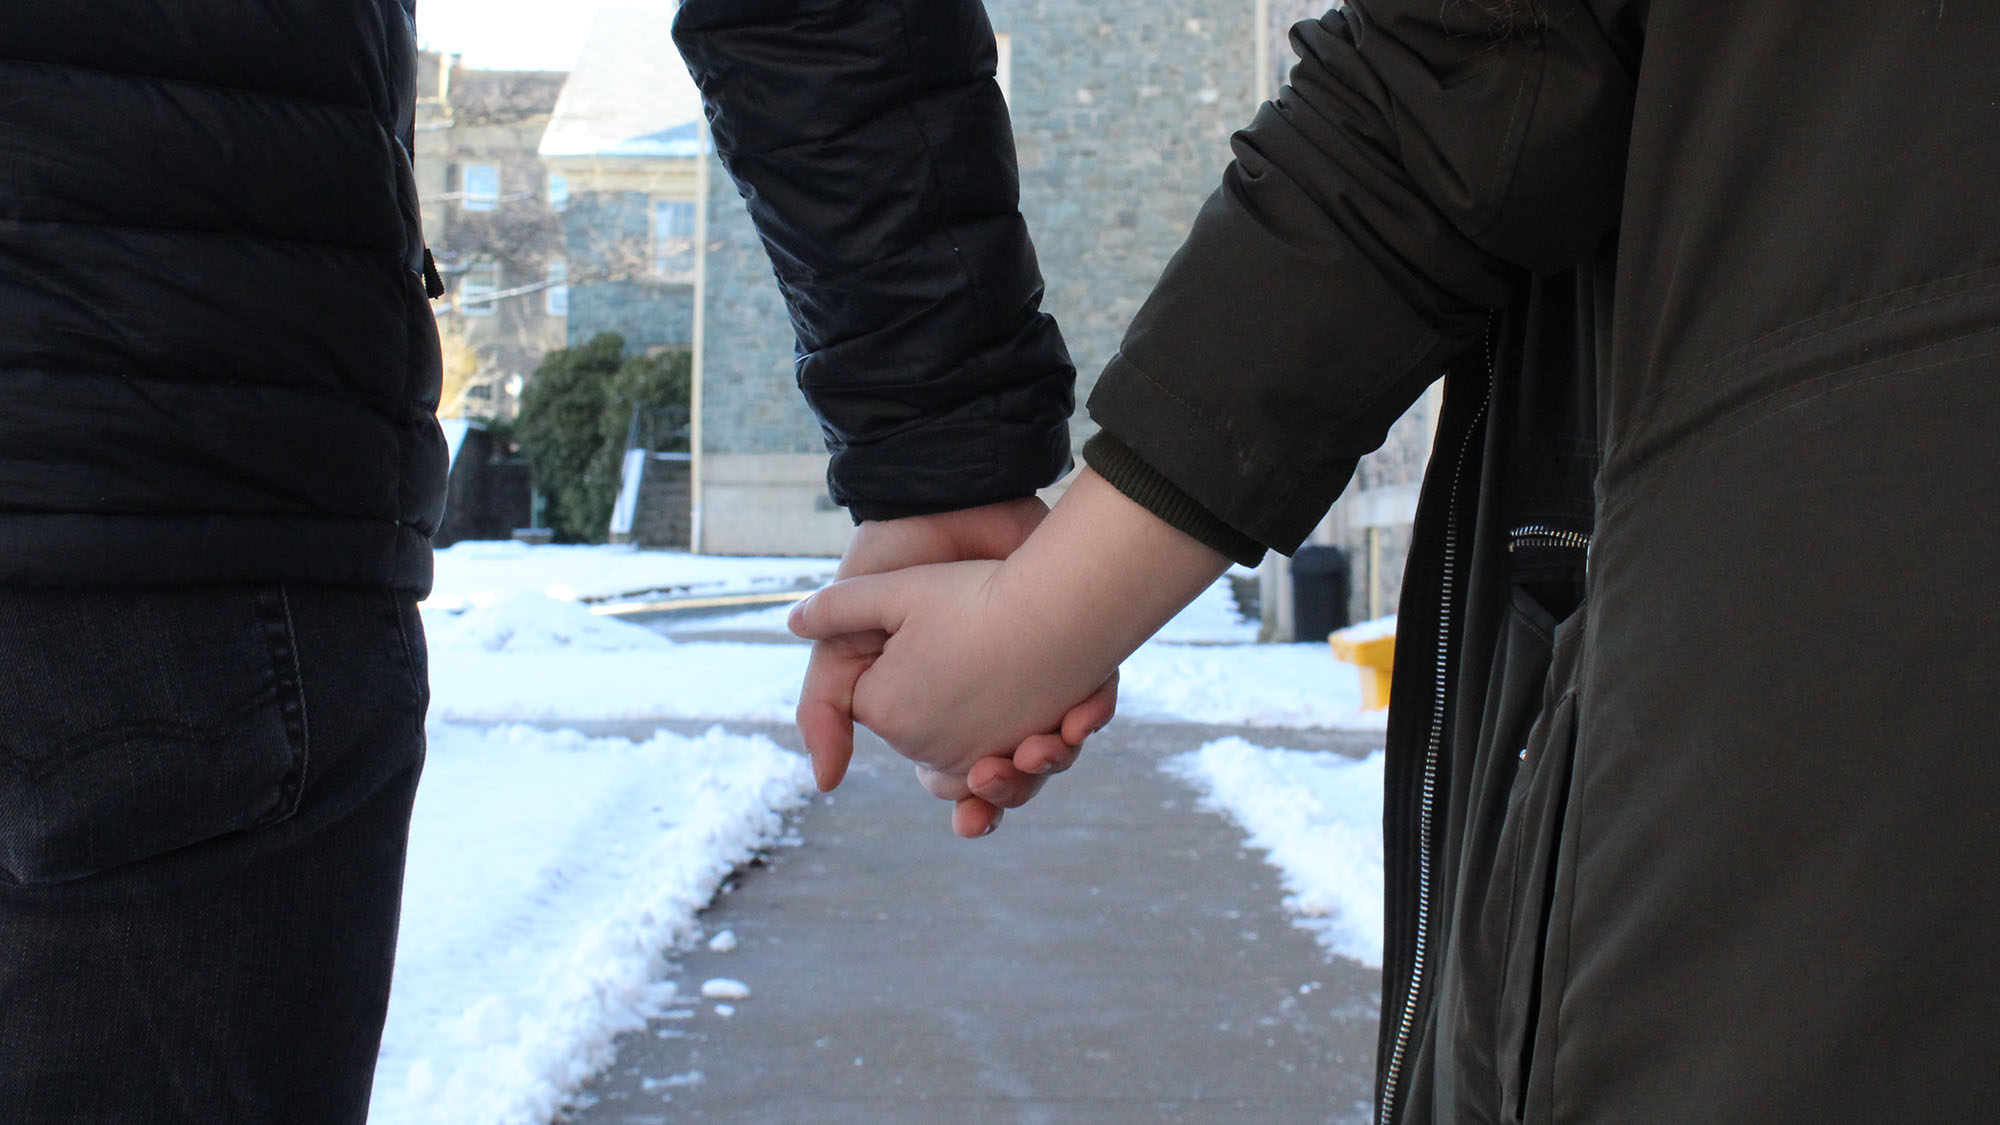 Photo illustration of two people holding hands